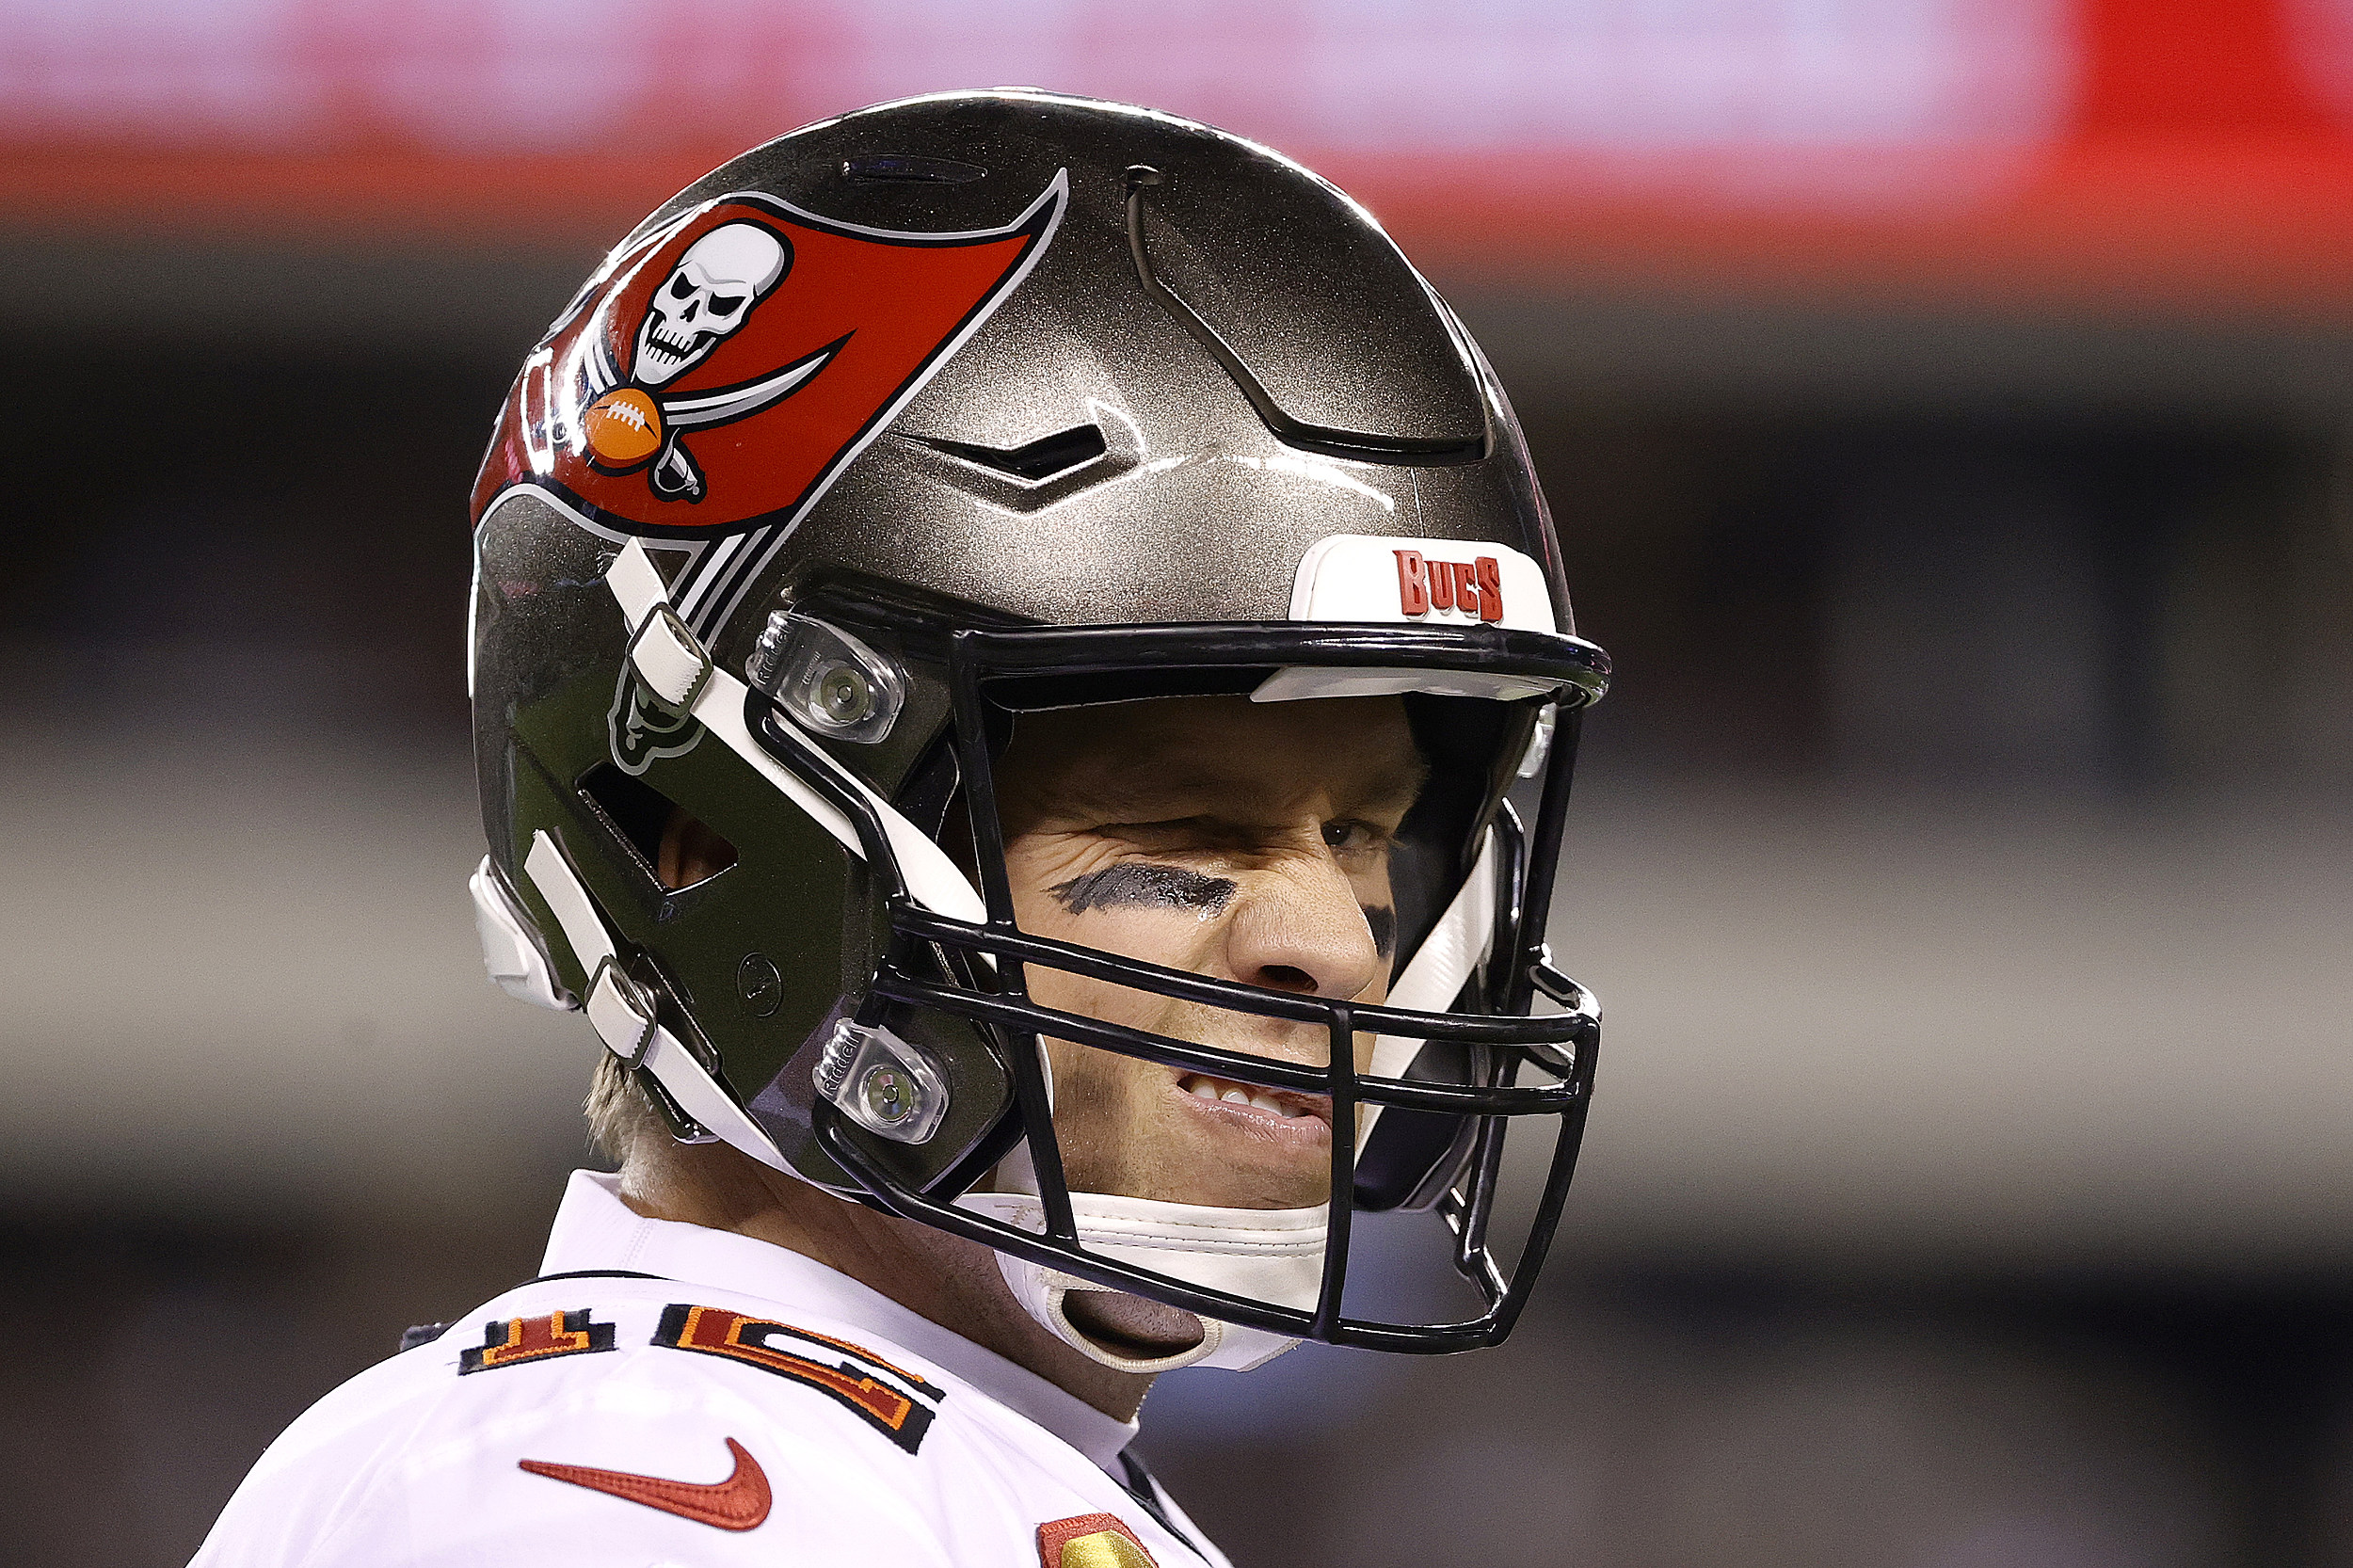 Buccaneers replace Falcons as most 'hated' NFL team In Louisiana